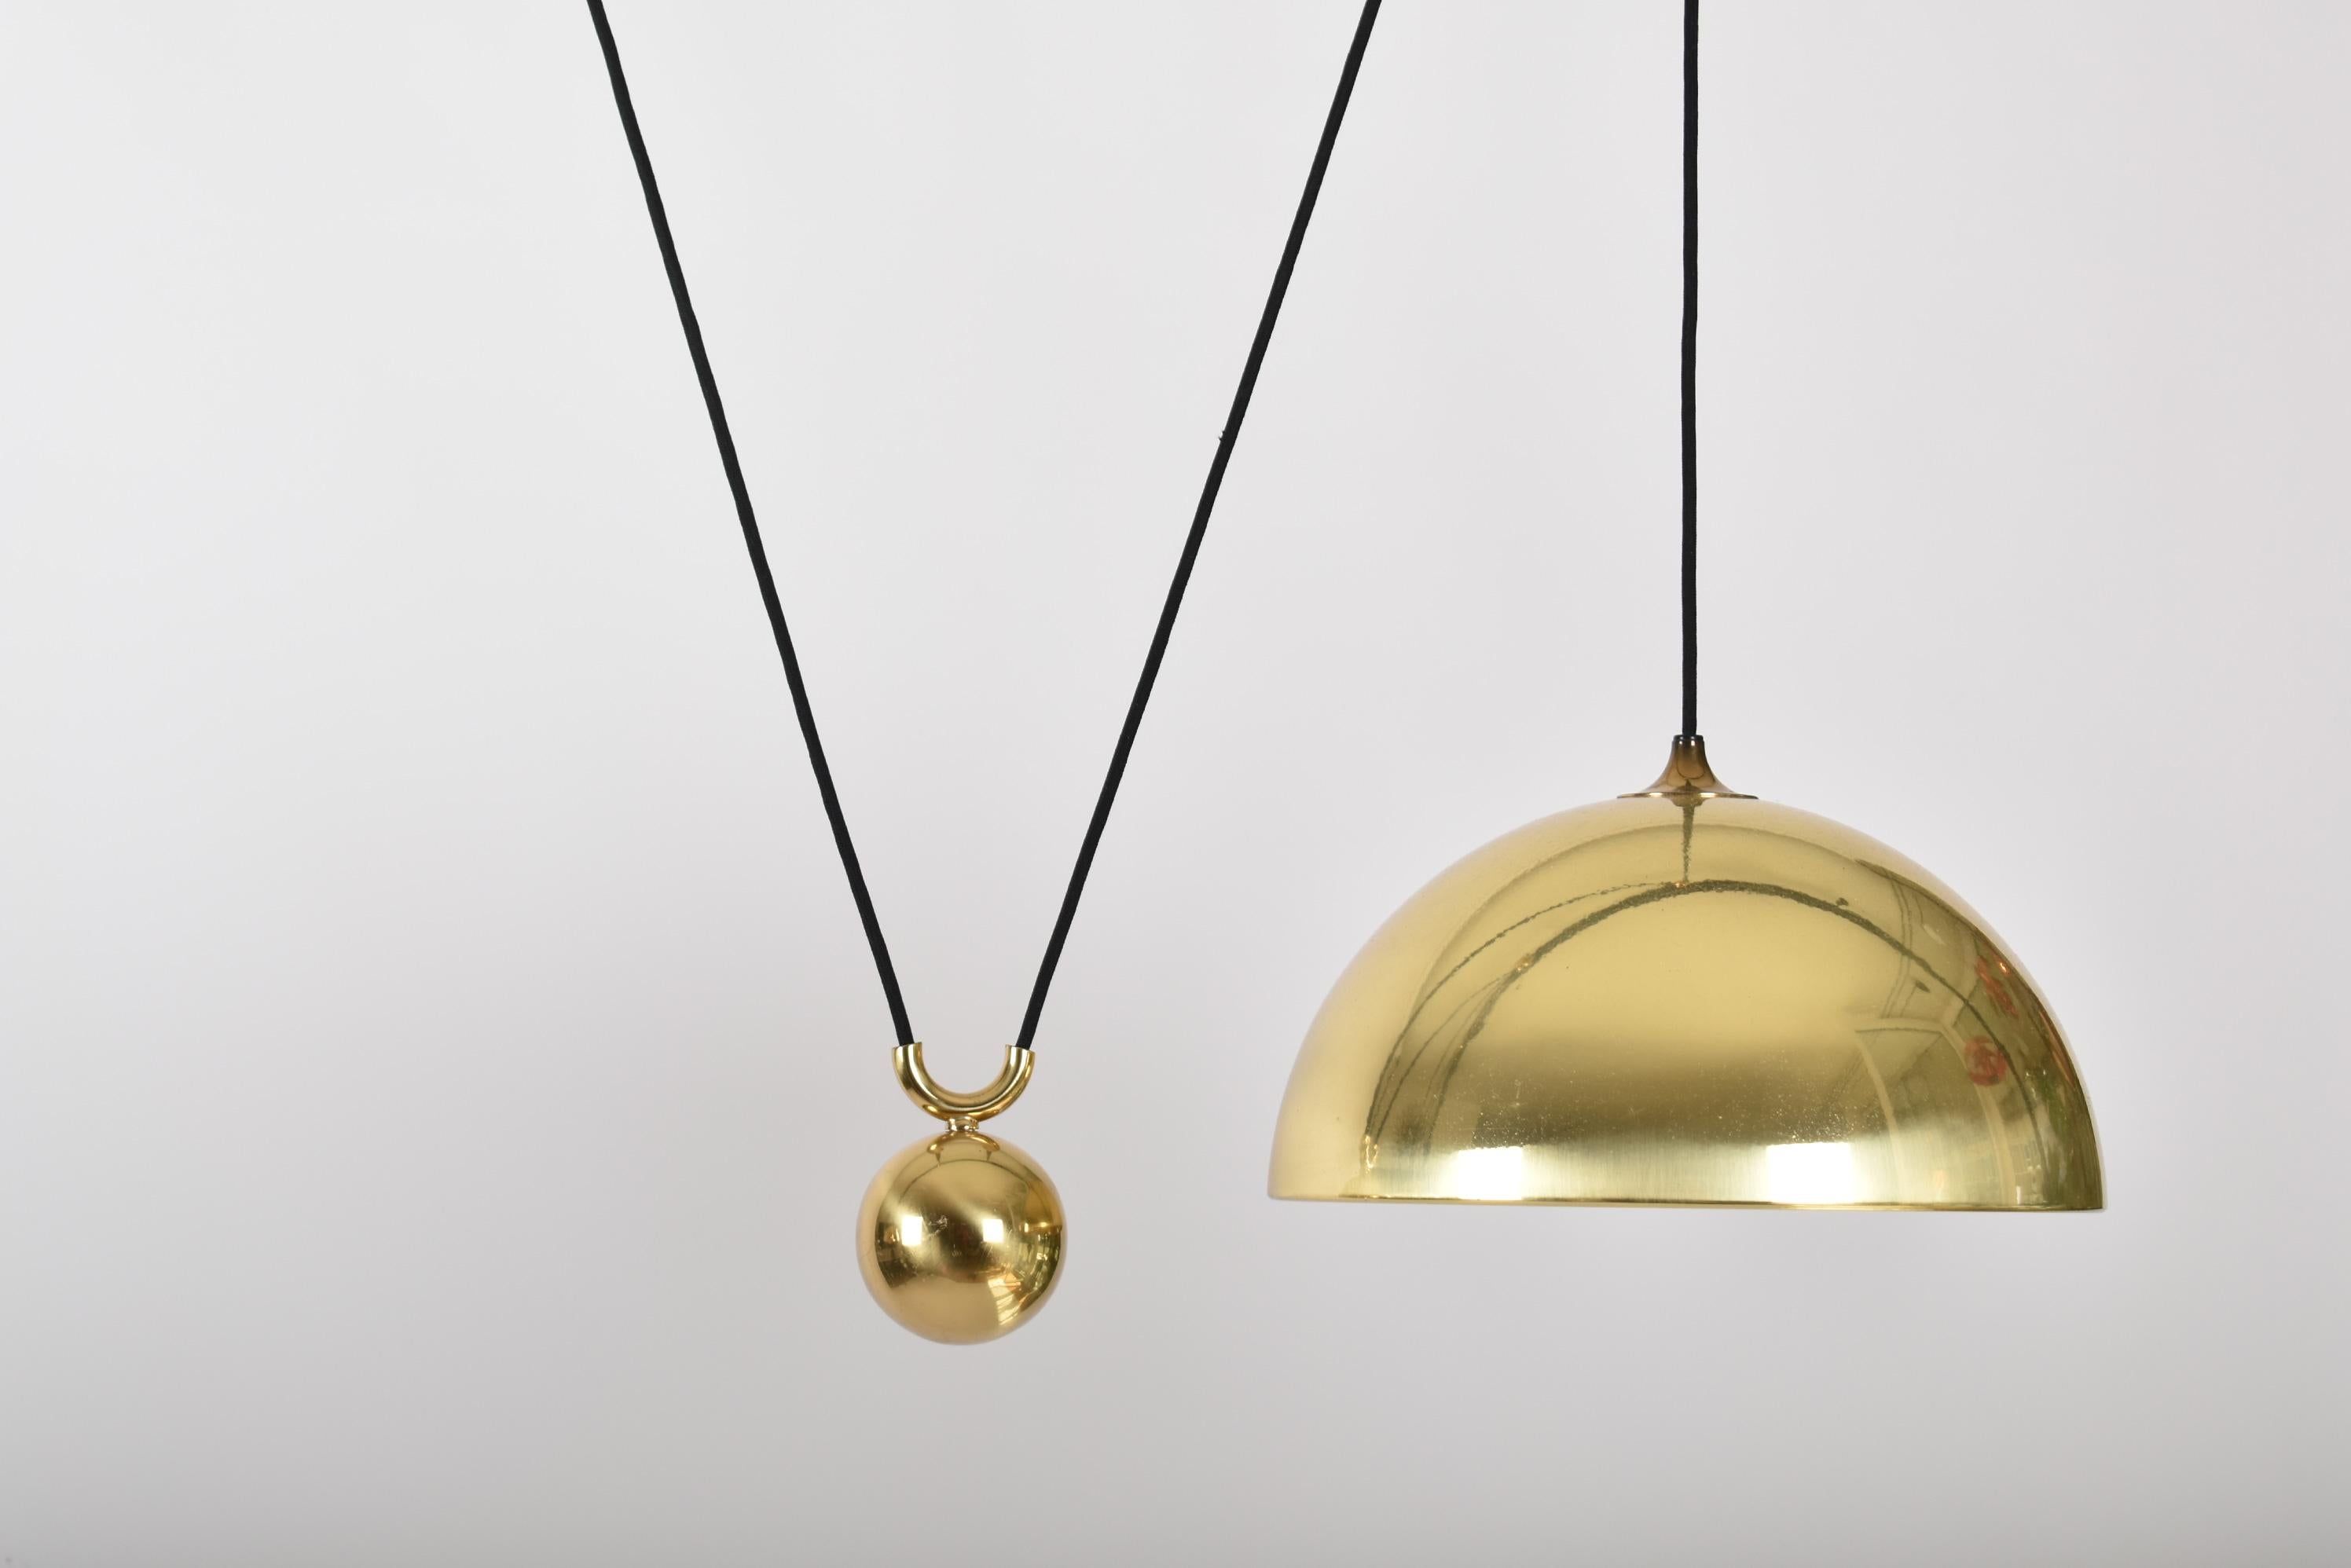 Polished Florian Schulz Double Counterbalance Brass Lamp, Germany, 1970